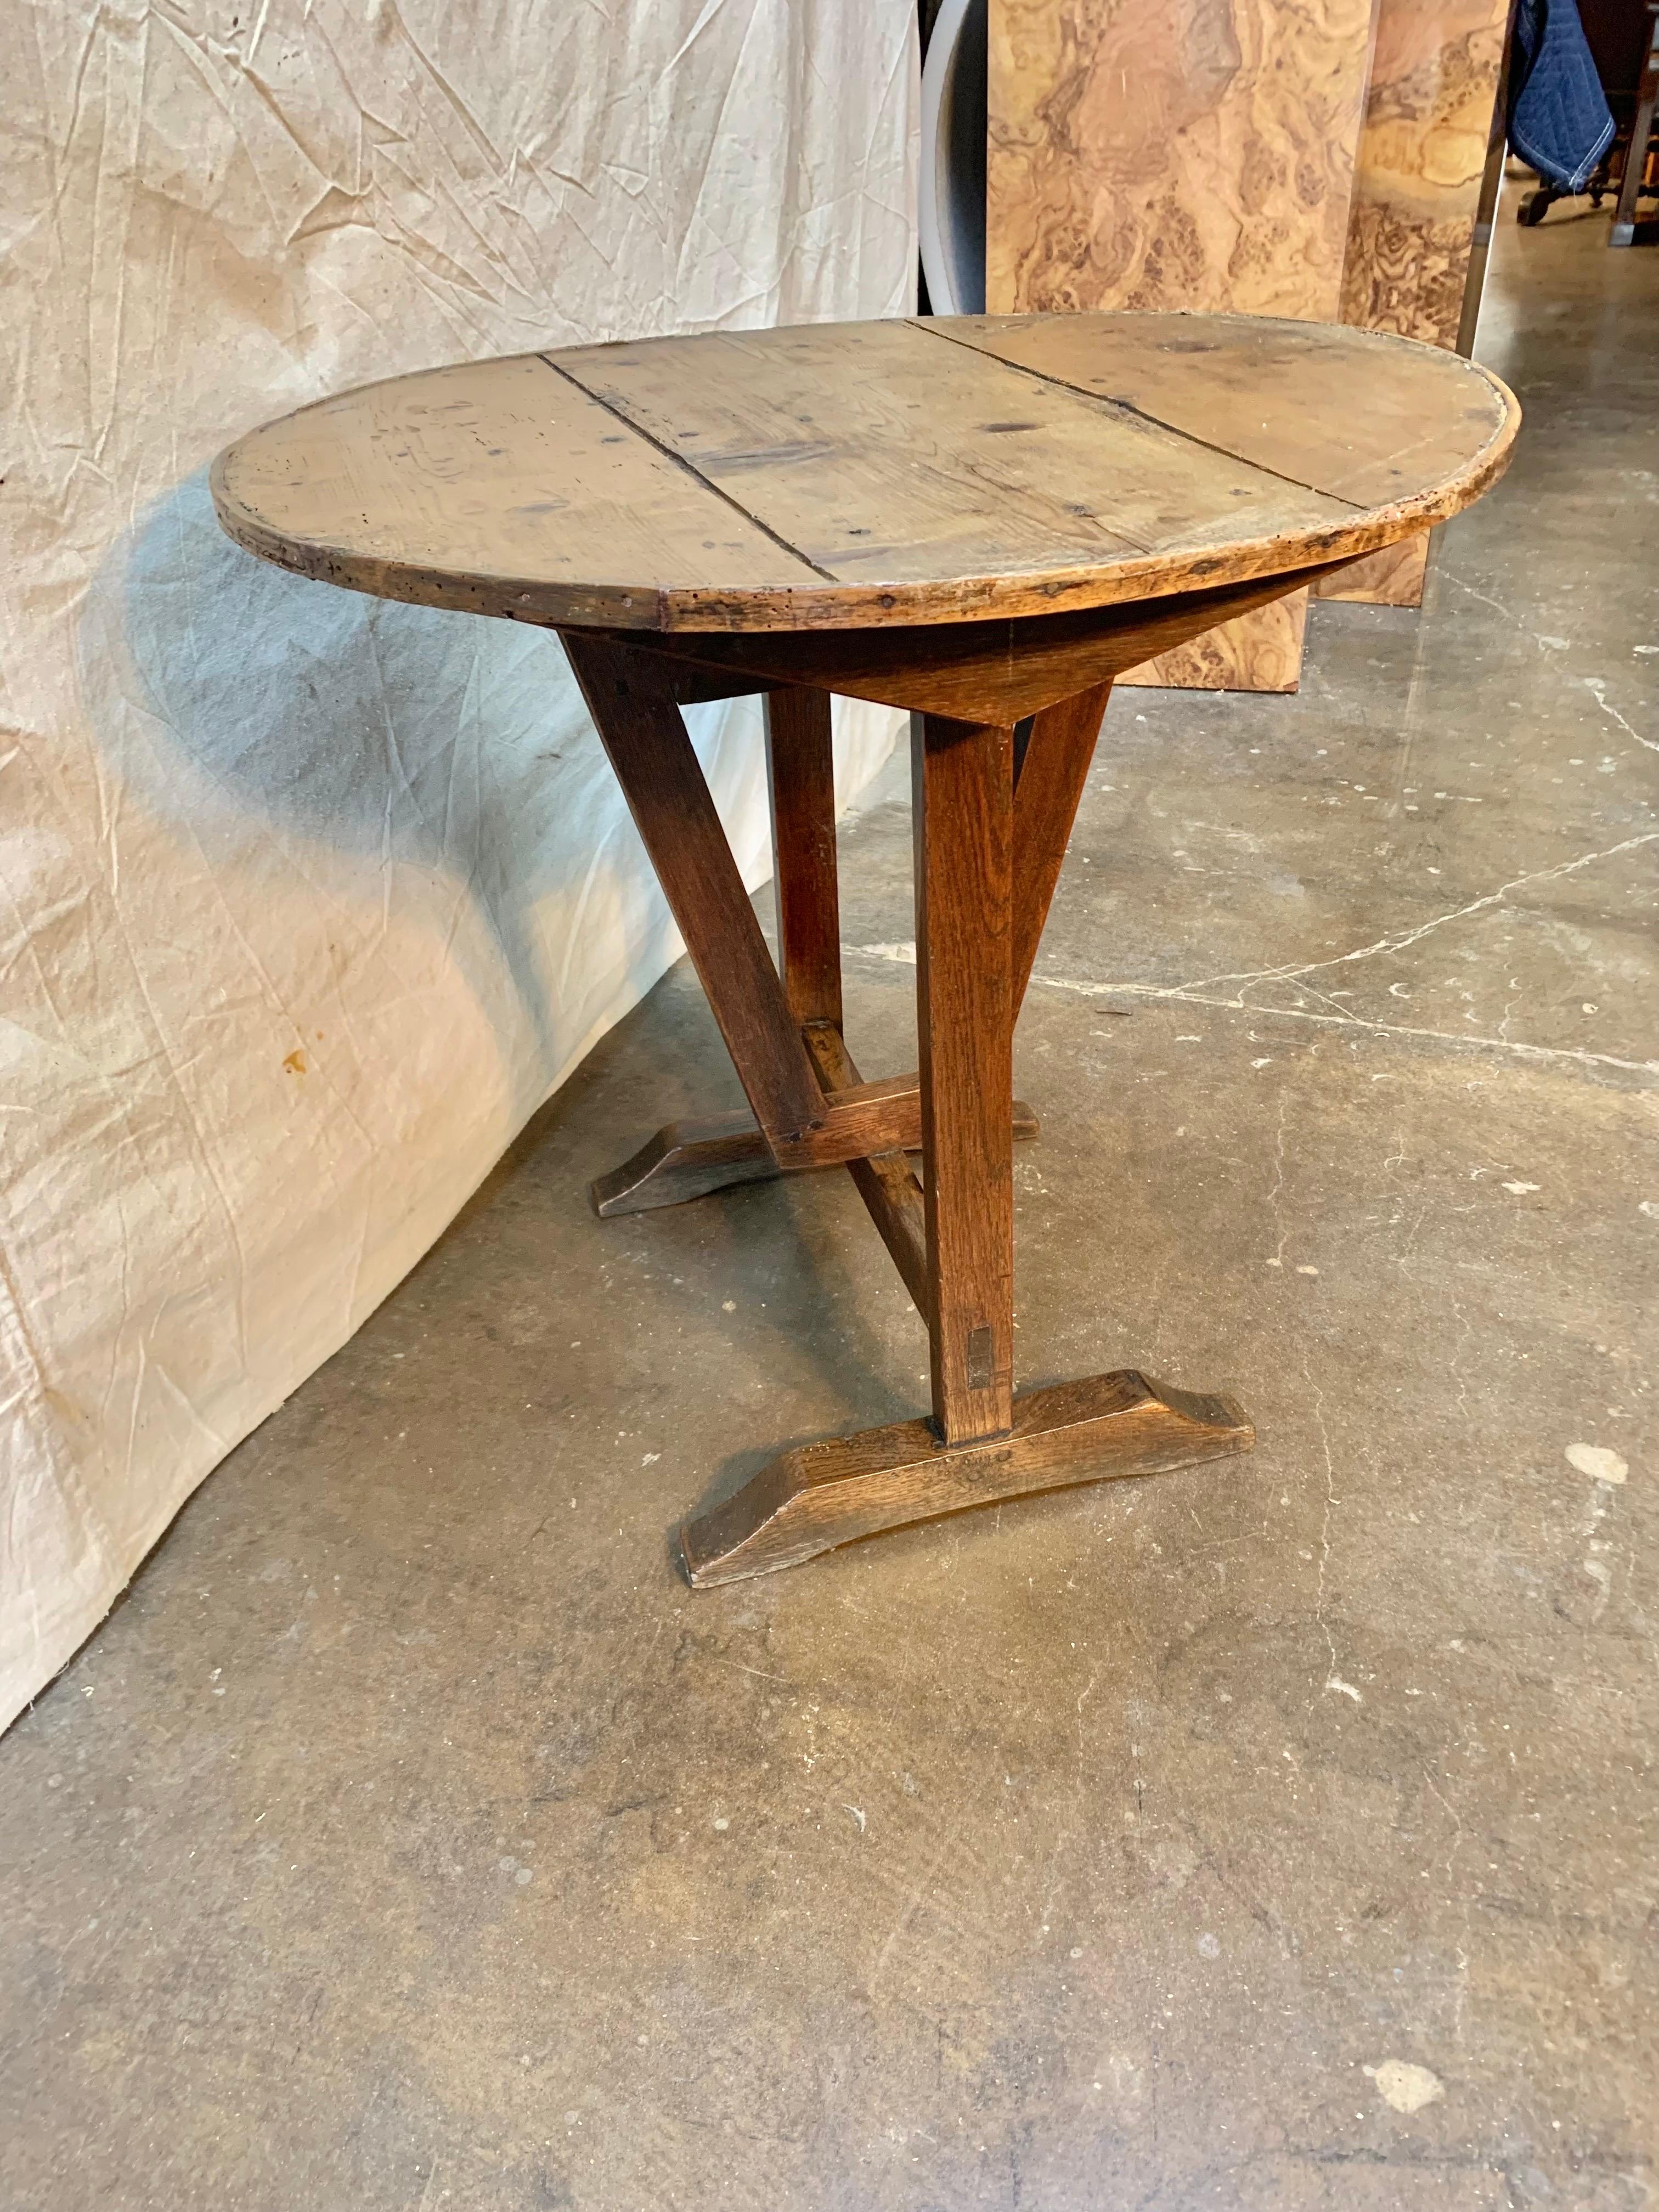 19th Century French wine tasting table, also known as a vendage or vigeron table, which was once used in the vineyards of France for tasting wine or enjoying a meal. This table would be suitable for use as a side table or in a wine cellar.  The top